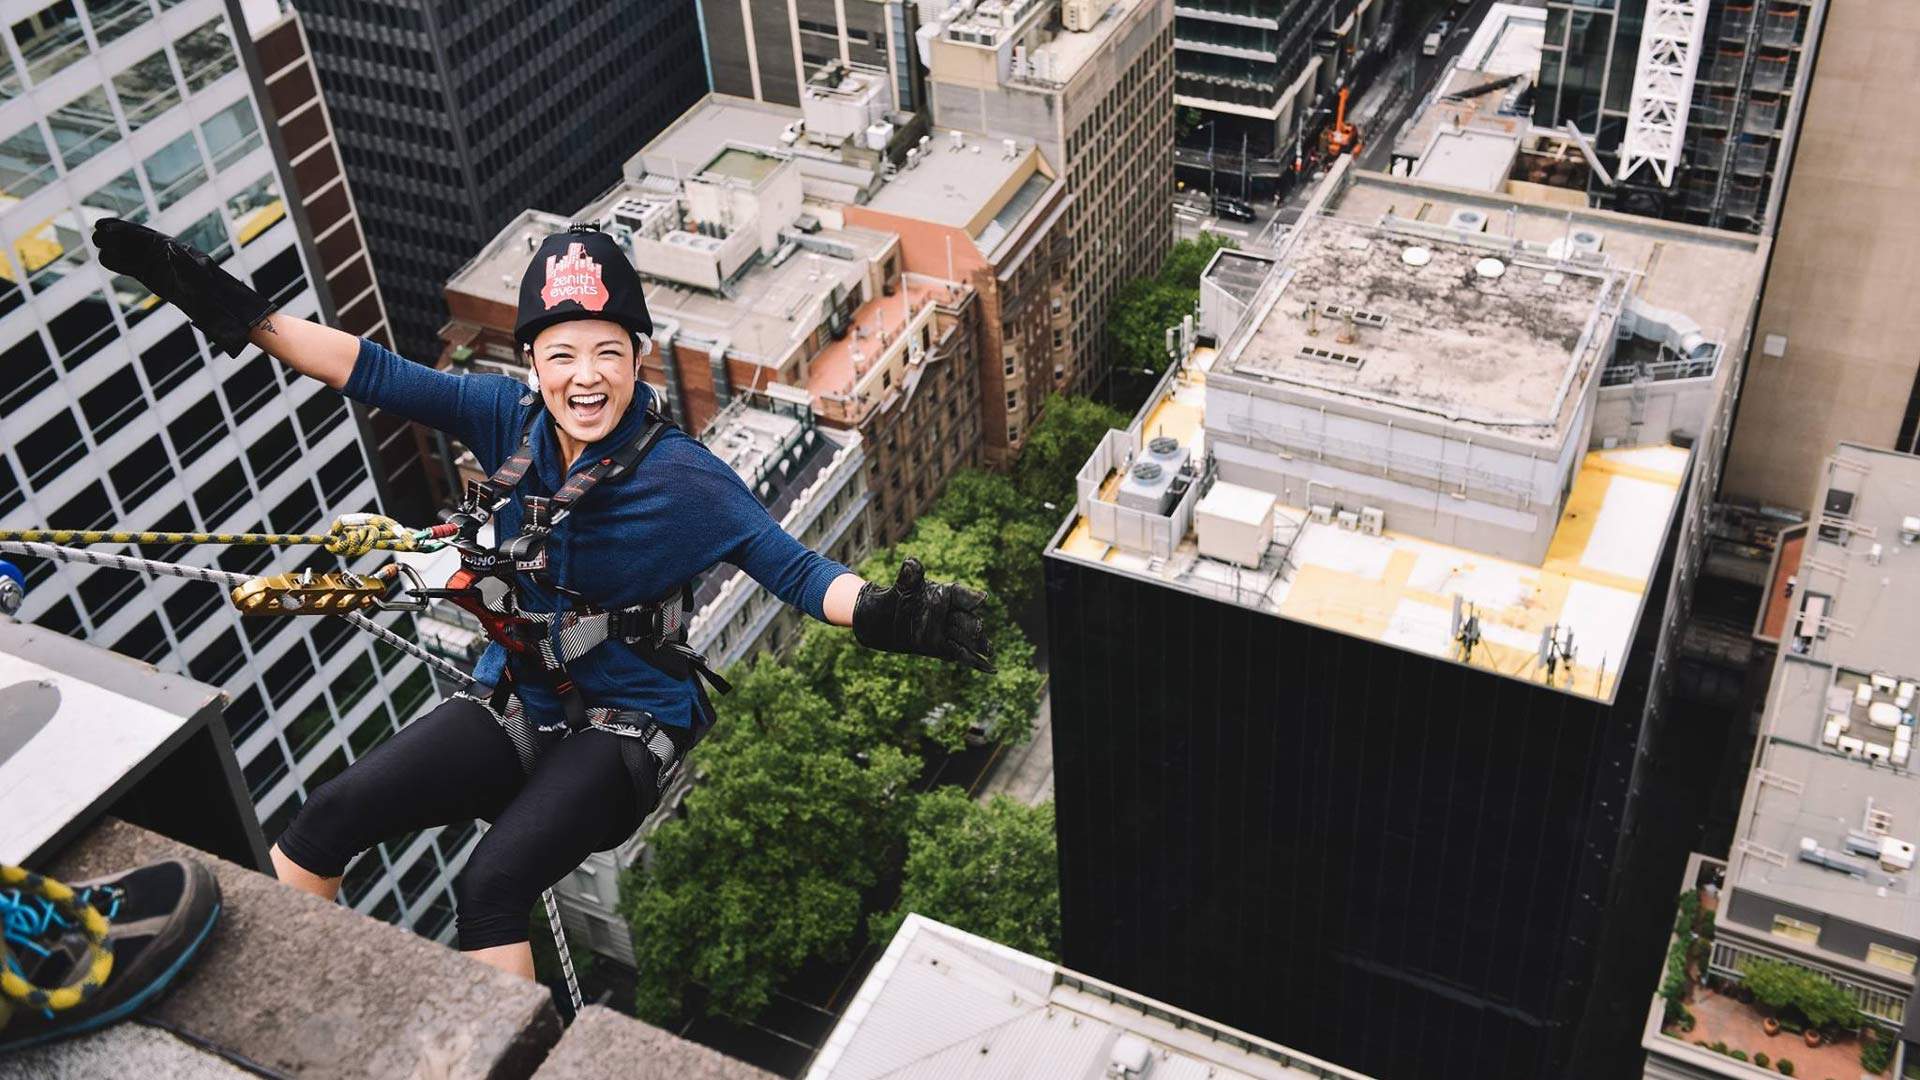 Melburnians Will Soon Be Able to Abseil Down a 27-Storey CBD Skyscraper